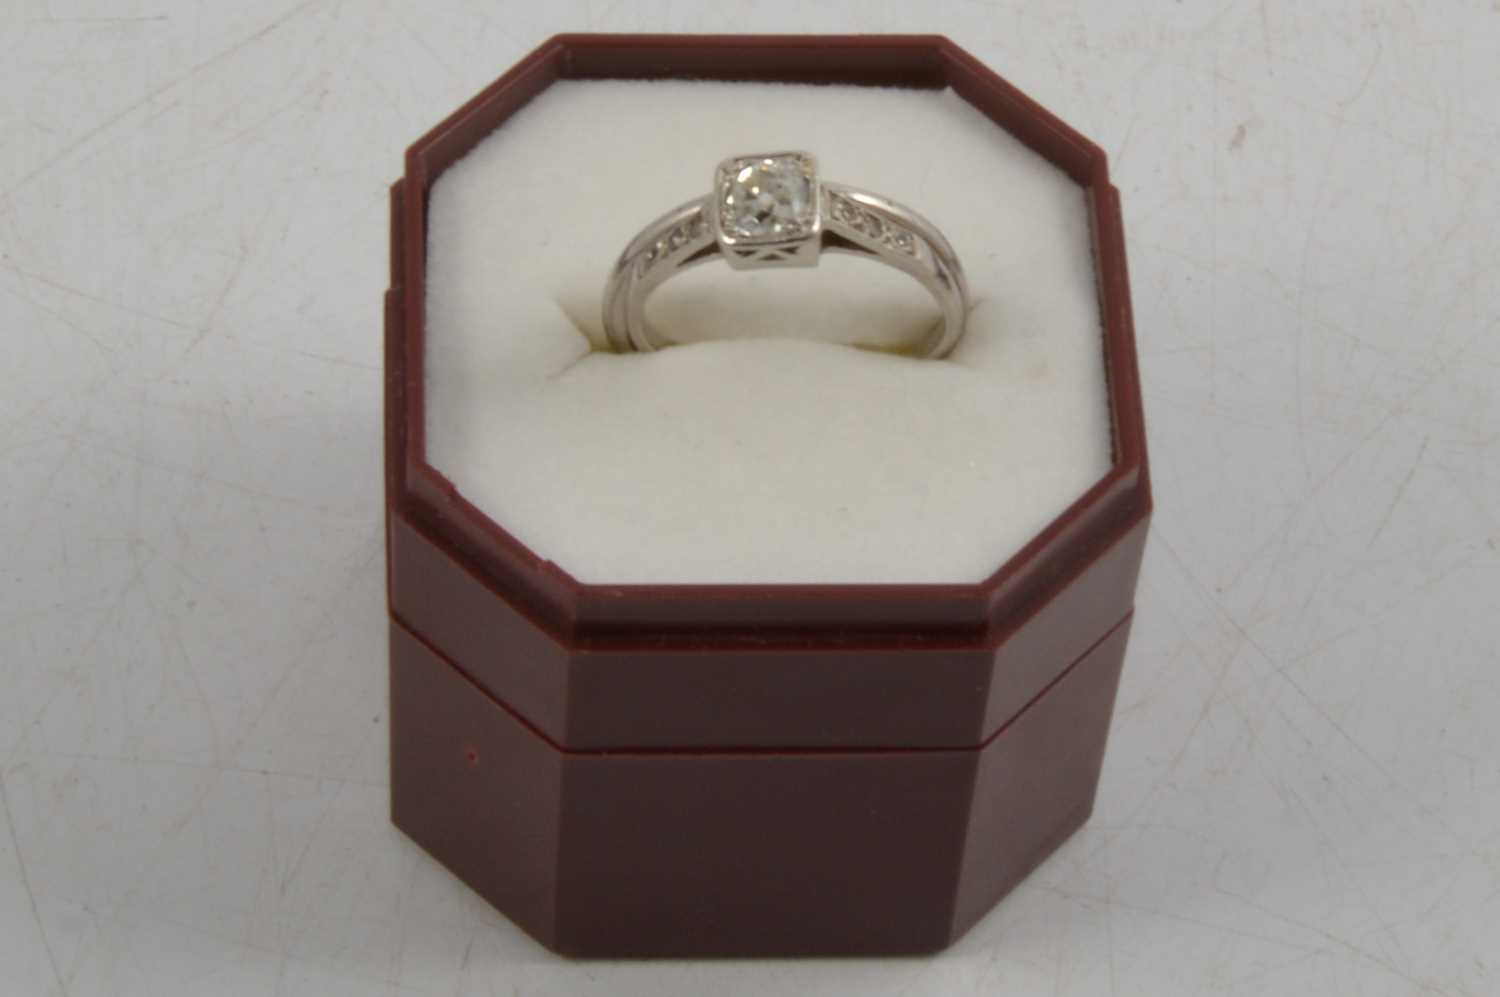 An old cut diamond ring and a wedding ring.